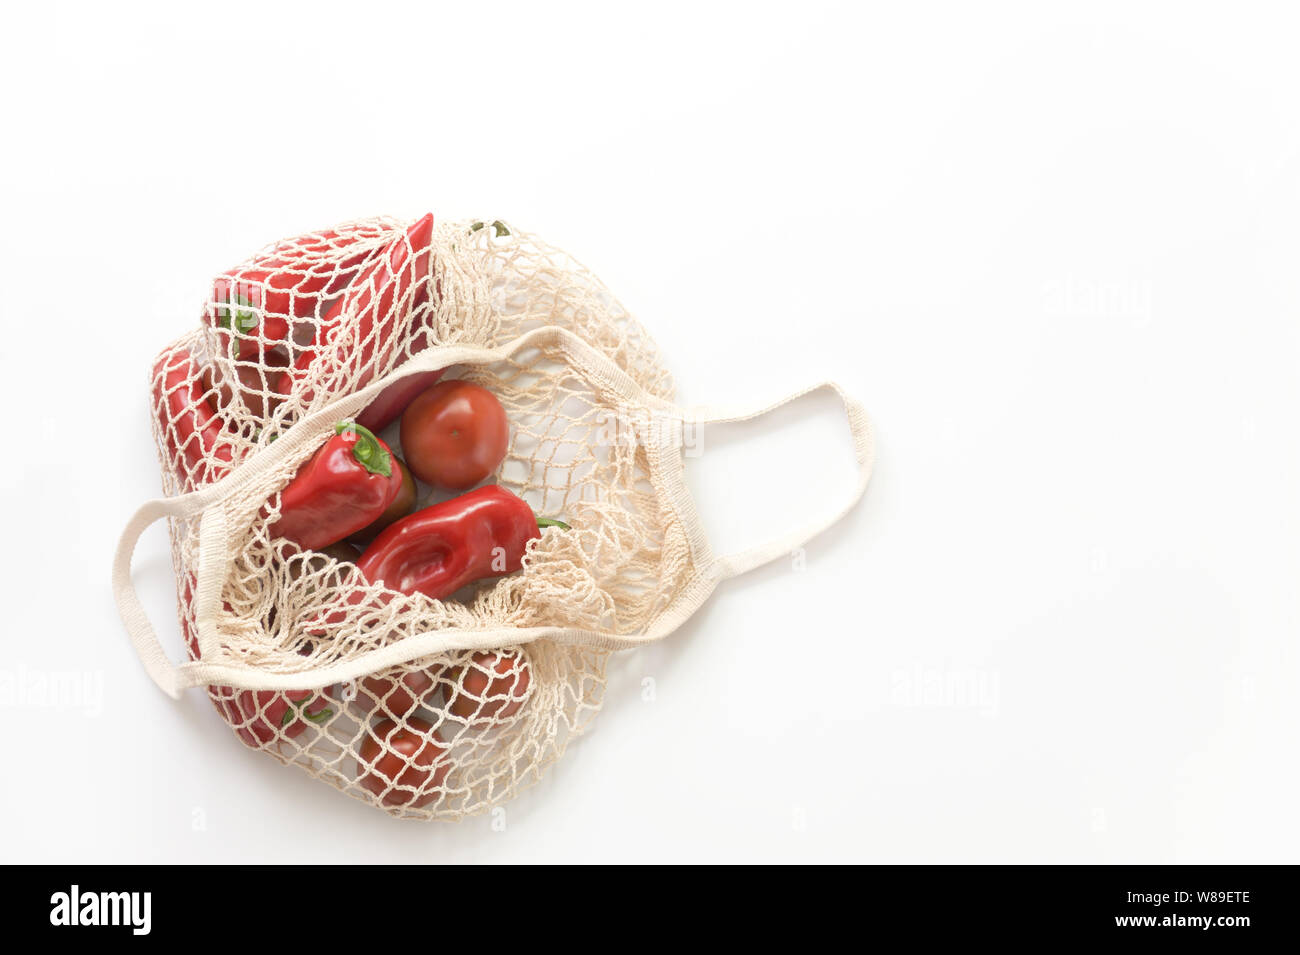 Reusable mesh string knitted shopping bag with tomatoes and red peppers. Zero Waste concept.Eco friendly. Stock Photo